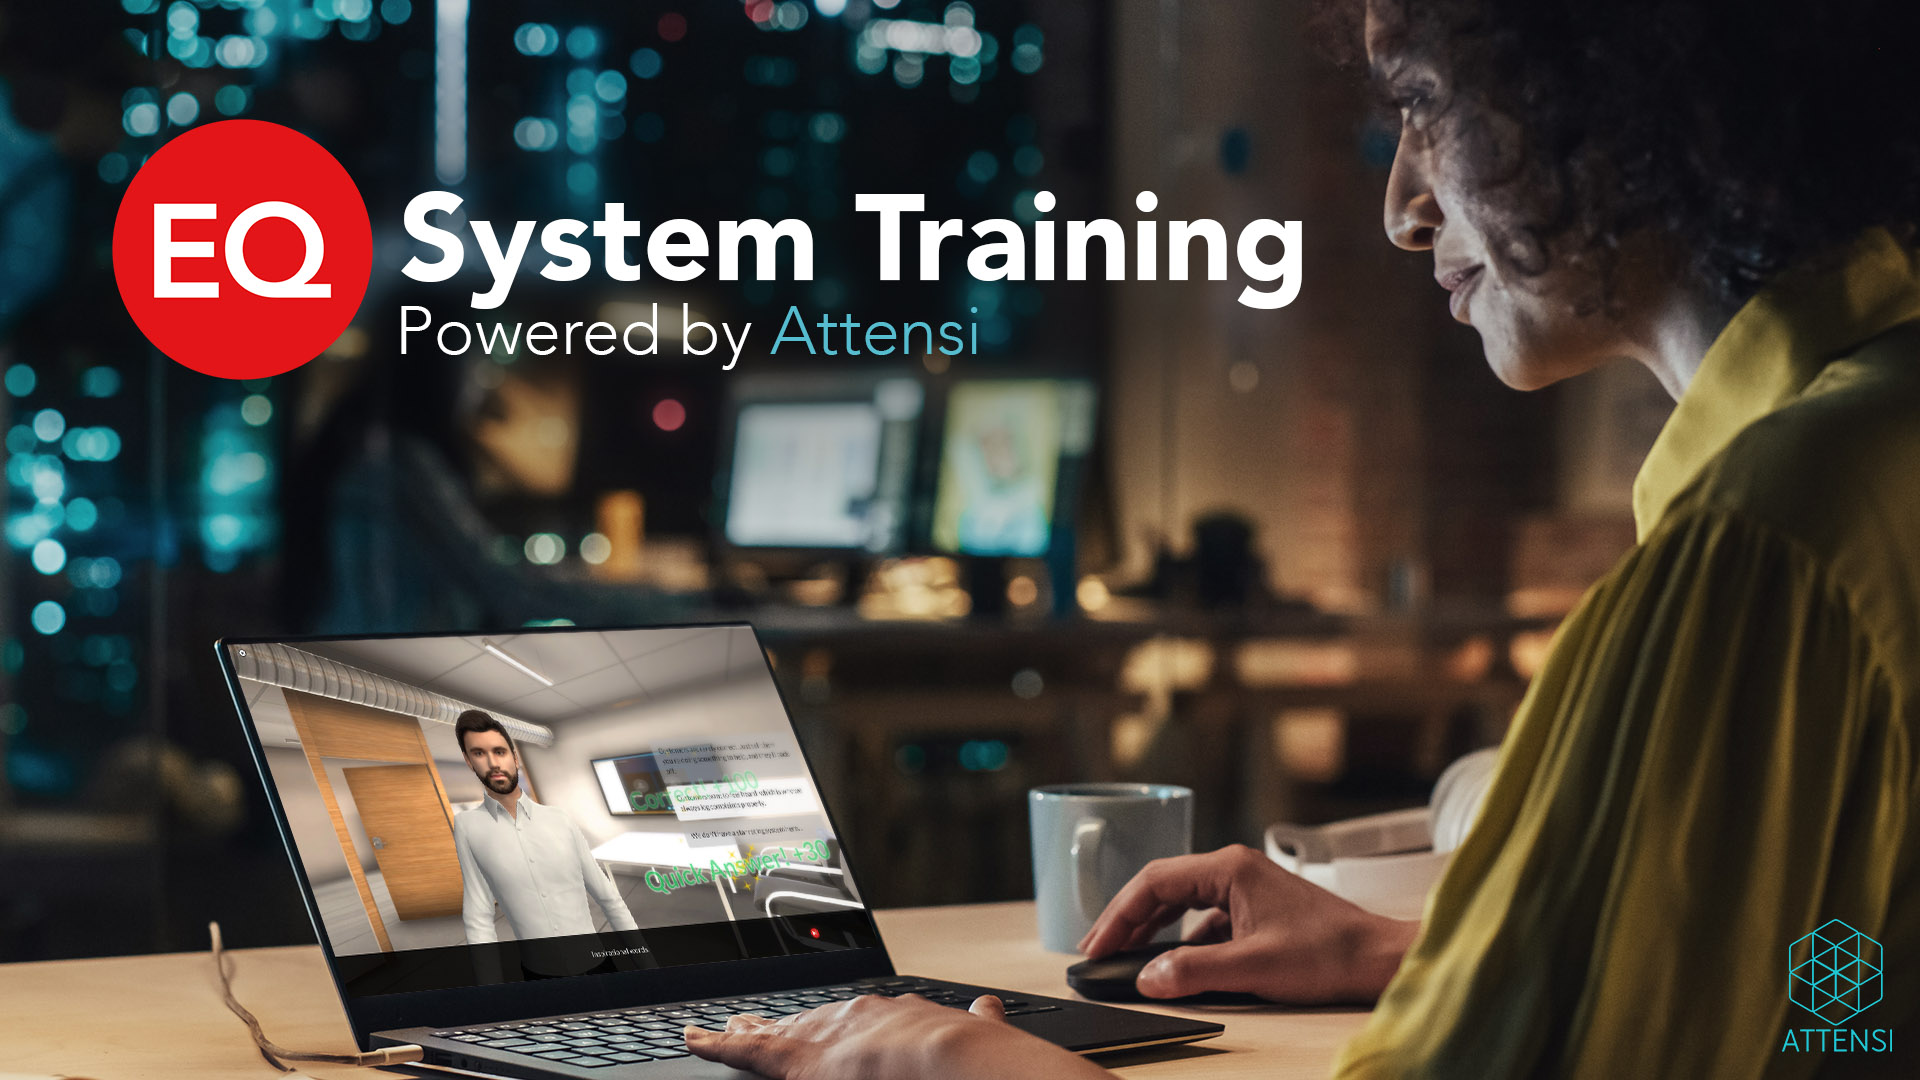 Equiniti partners with Attensi to deliver gamified simulation Training and Development 